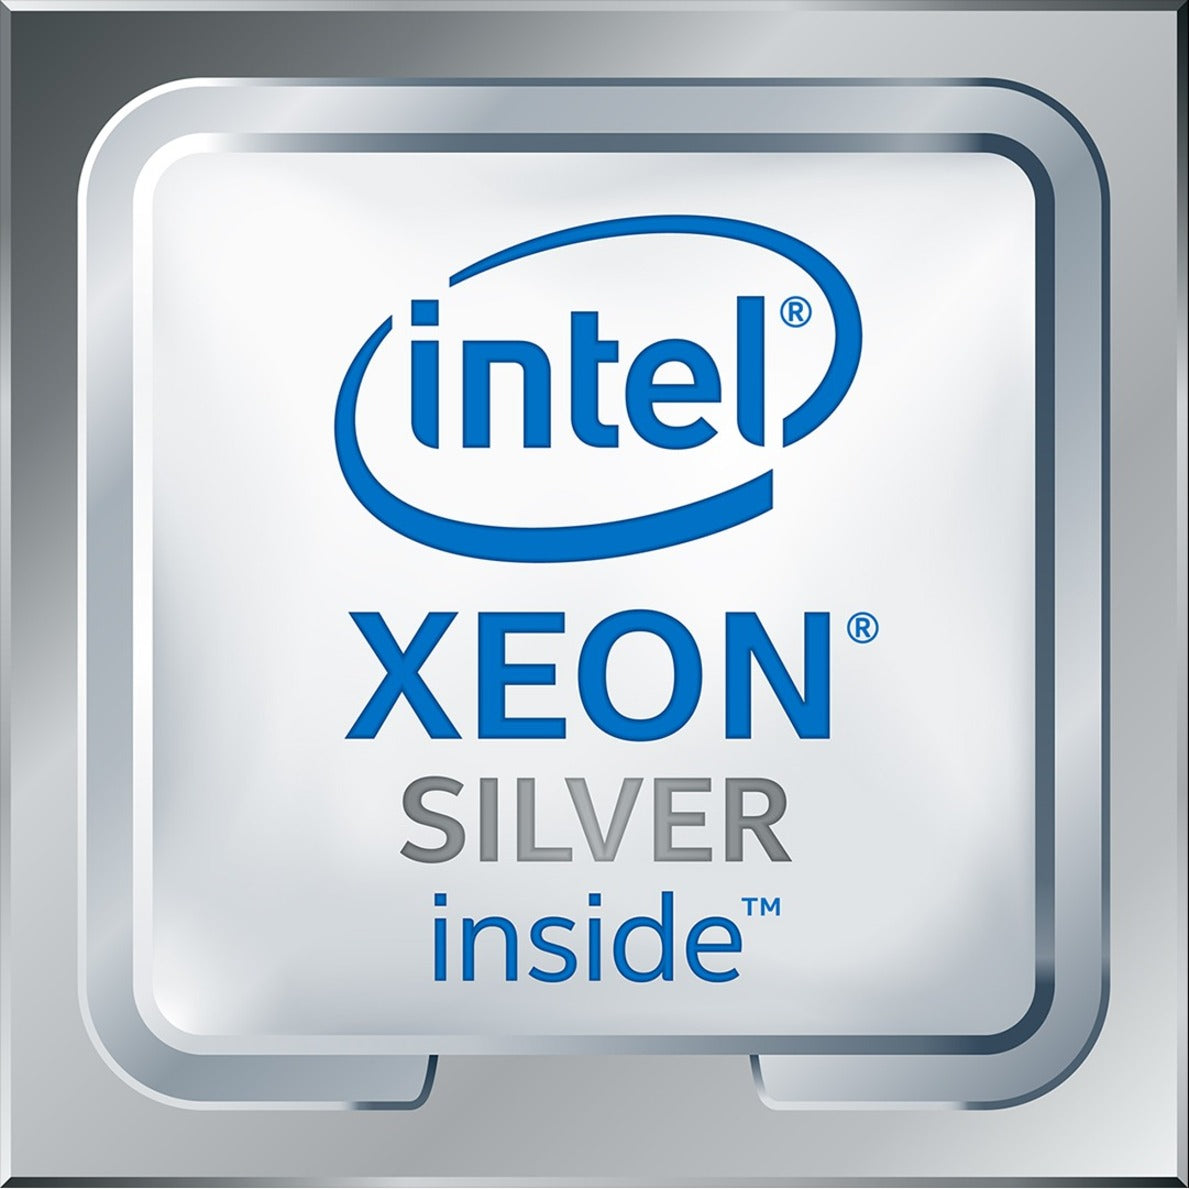 HPE P02580-B21 Xeon Silver Dodeca-core 4214 2.2GHz Server Processor Upgrade, 17MB L3 Cache, 2.20 GHz Clock Speed